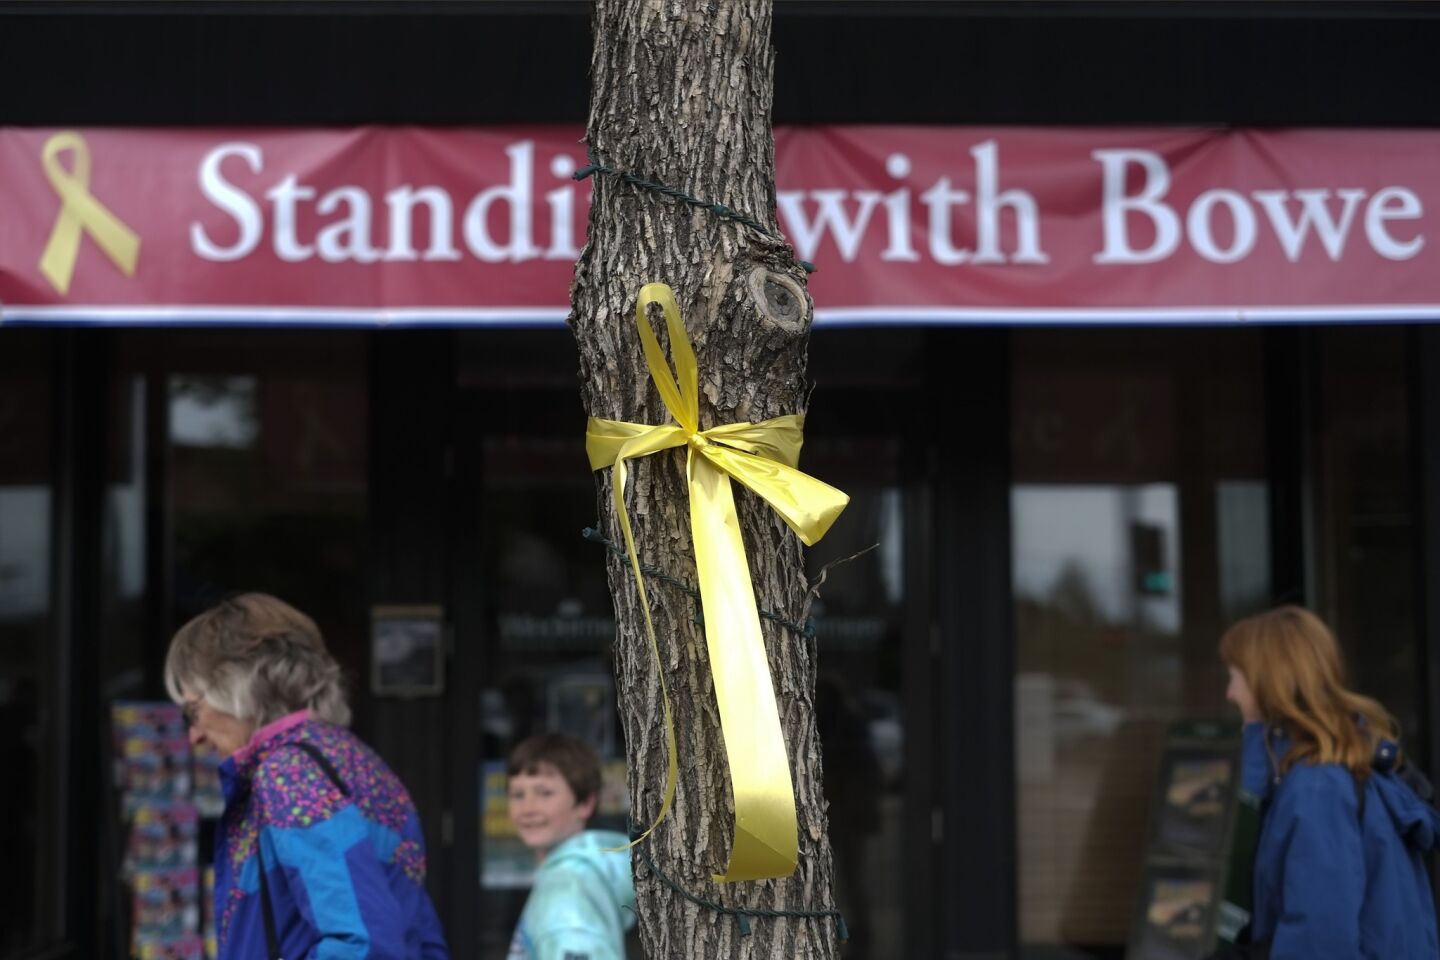 A yellow ribbon honoring captive U.S. Army Sgt. Bowe Bergdahl is tied to a tree in Hailey, Idaho.